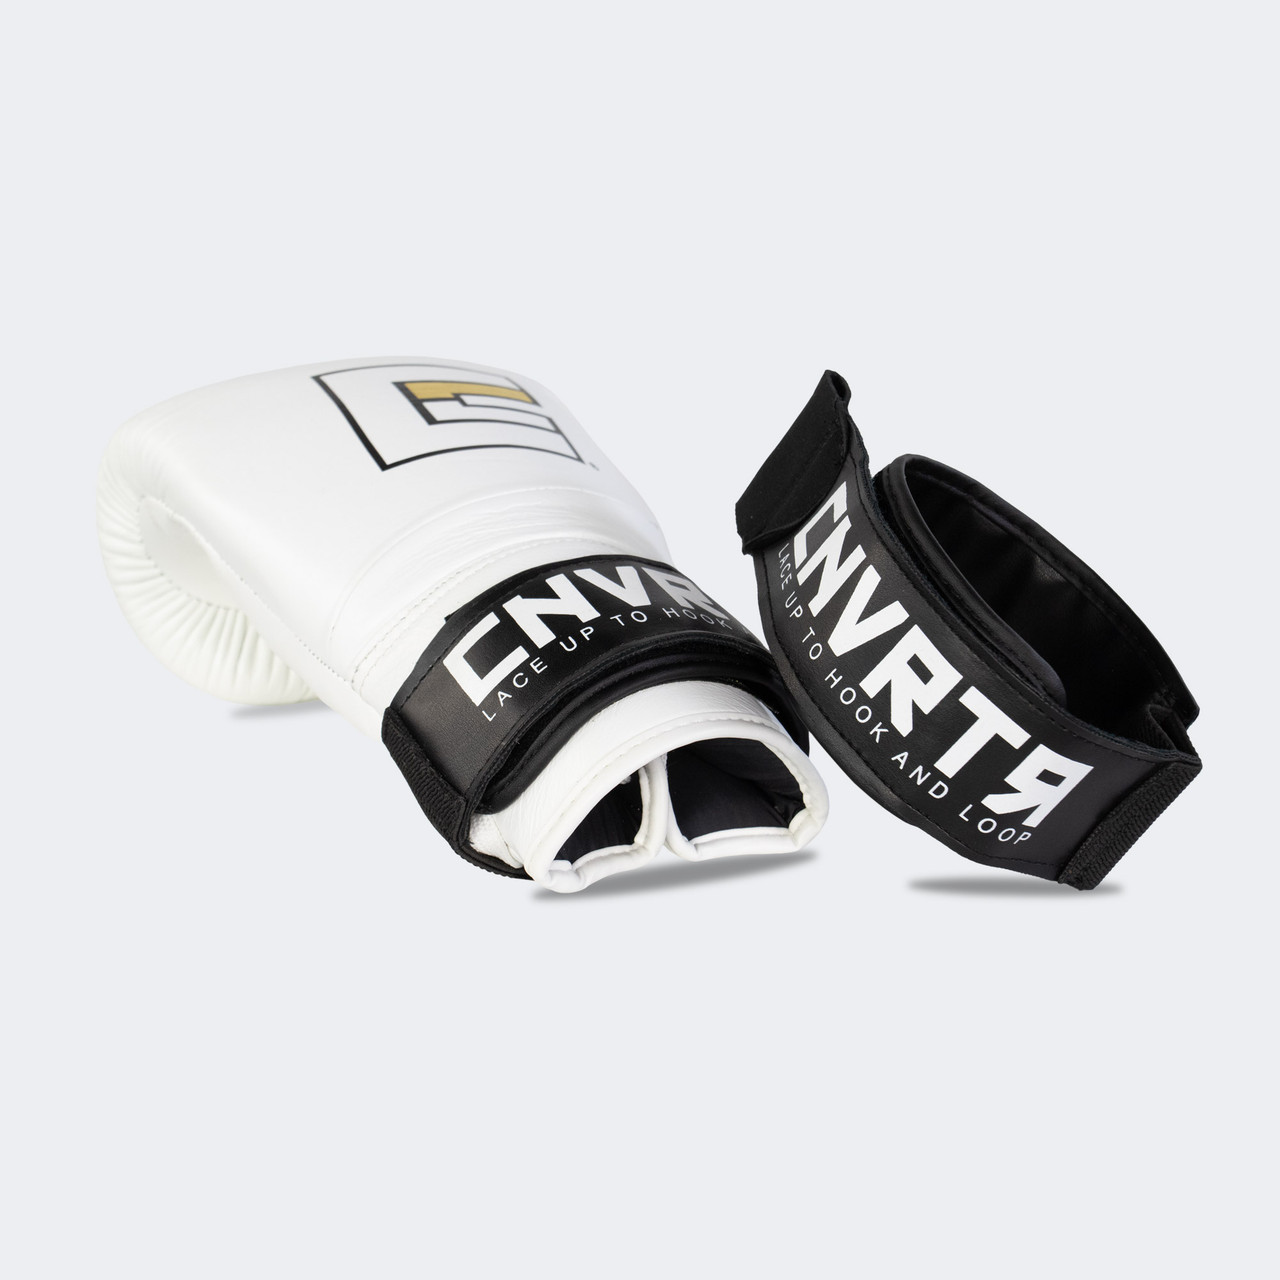 Review of the Lace And Loop Velcro Converter for Lace Up Boxing Gloves 